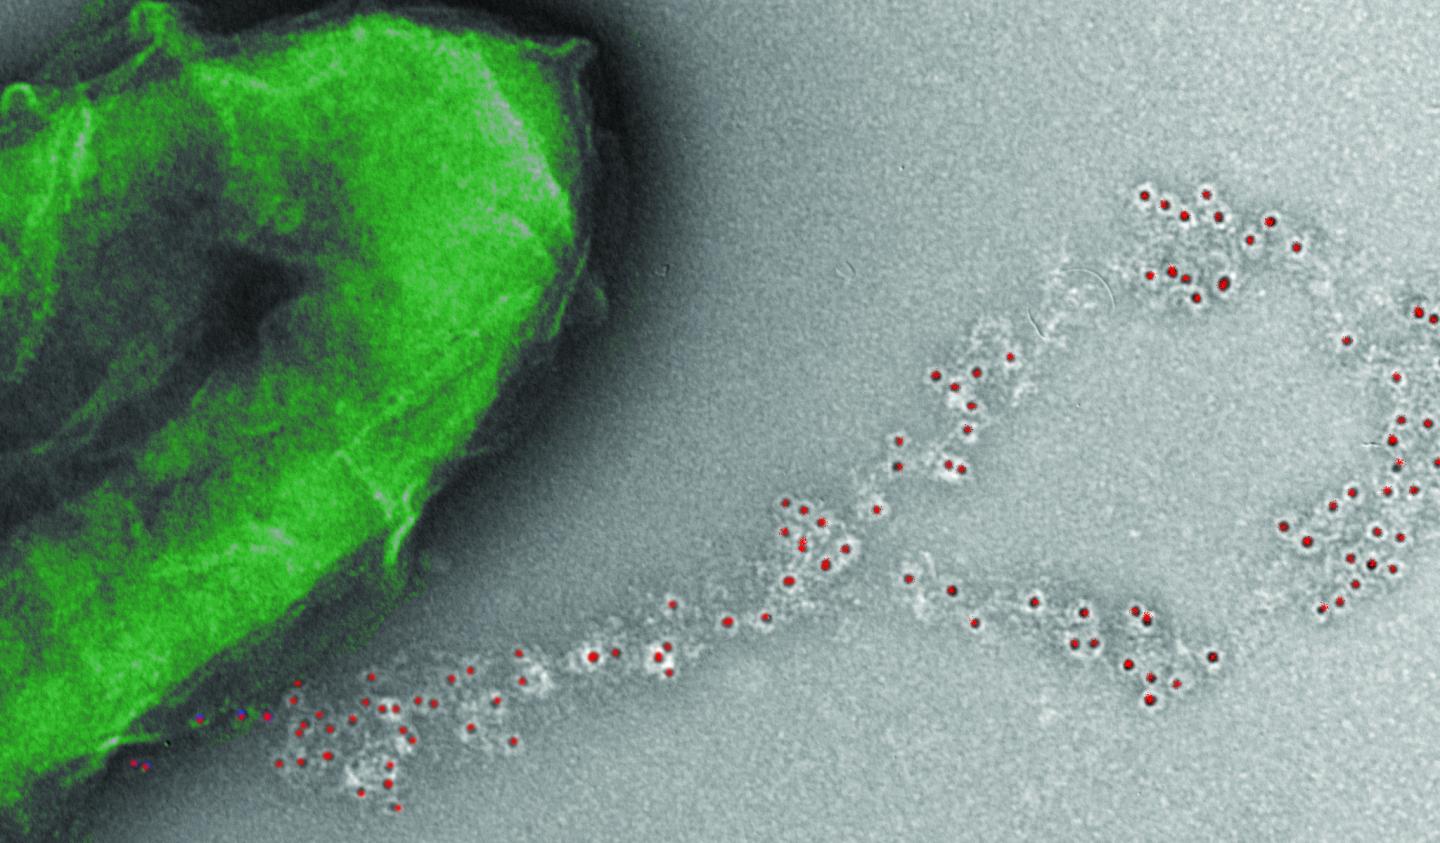 Electron Micrograph of Geobacter (Green) Expressing Wires Decorated with Peptide Tags (Red Dots).